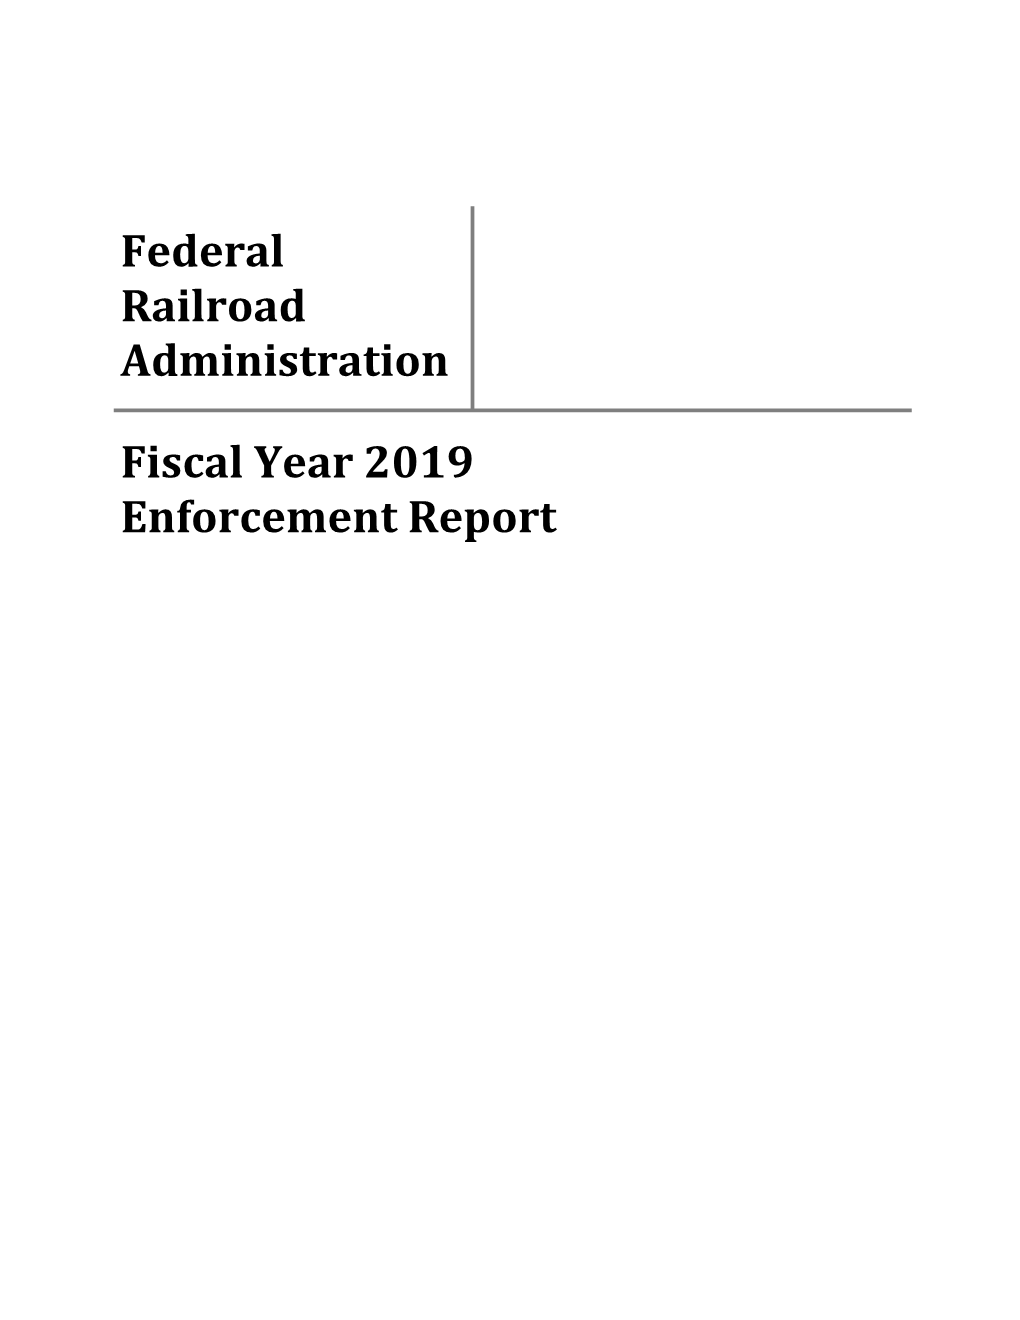 Federal Railroad Administration Fiscal Year 2019 Enforcement Report